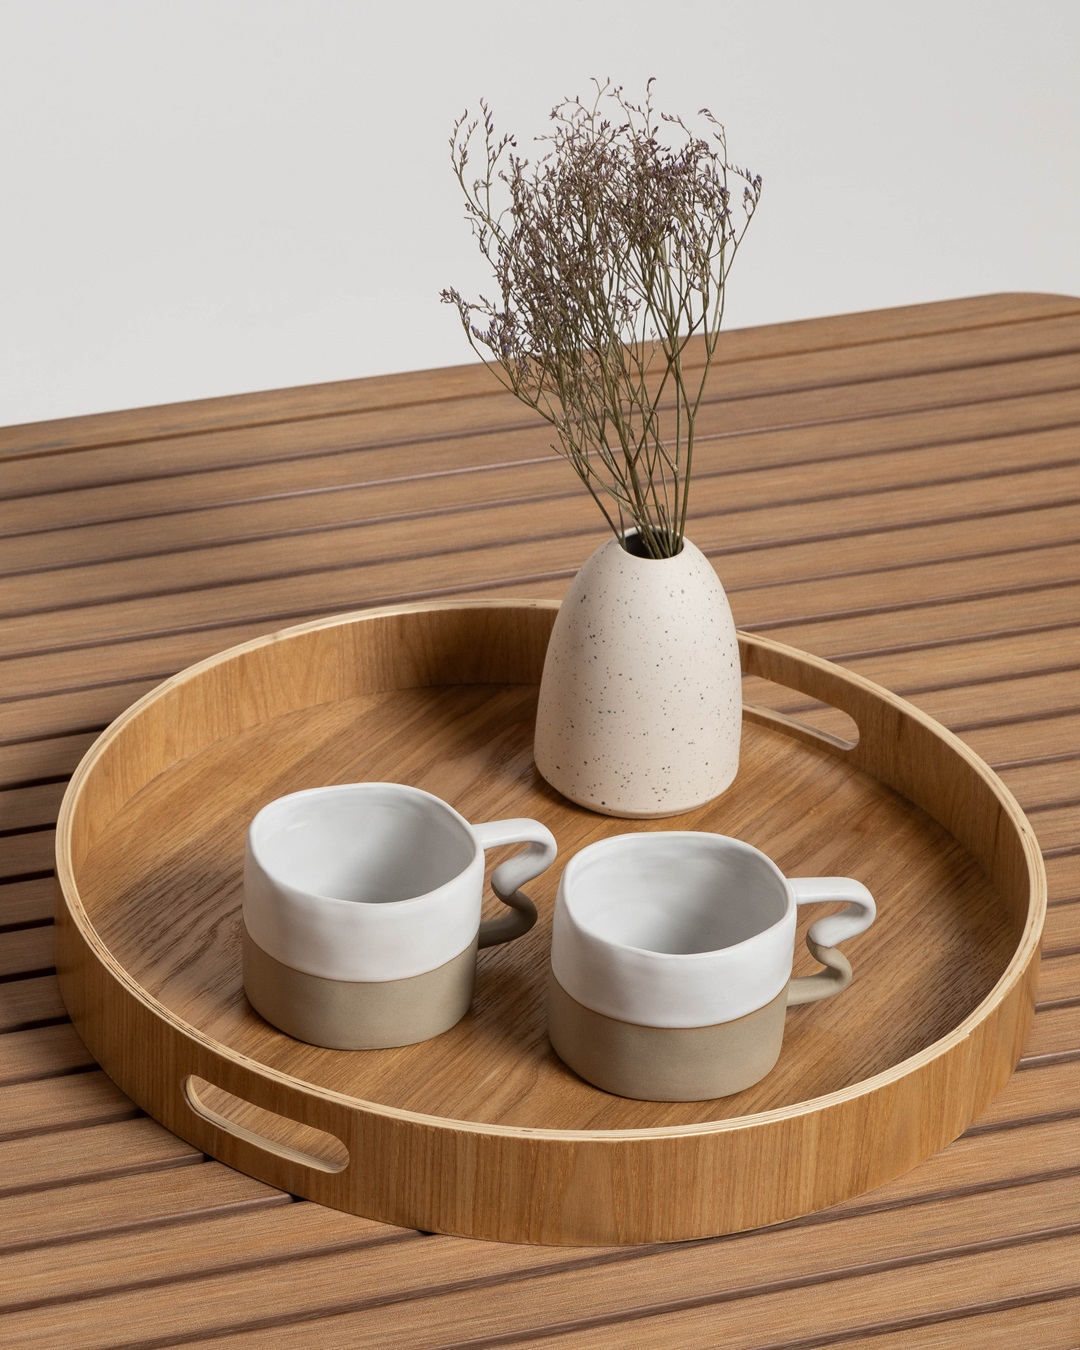 Benni mugs white and sand with squiggle handles on tray with vase on wooden table